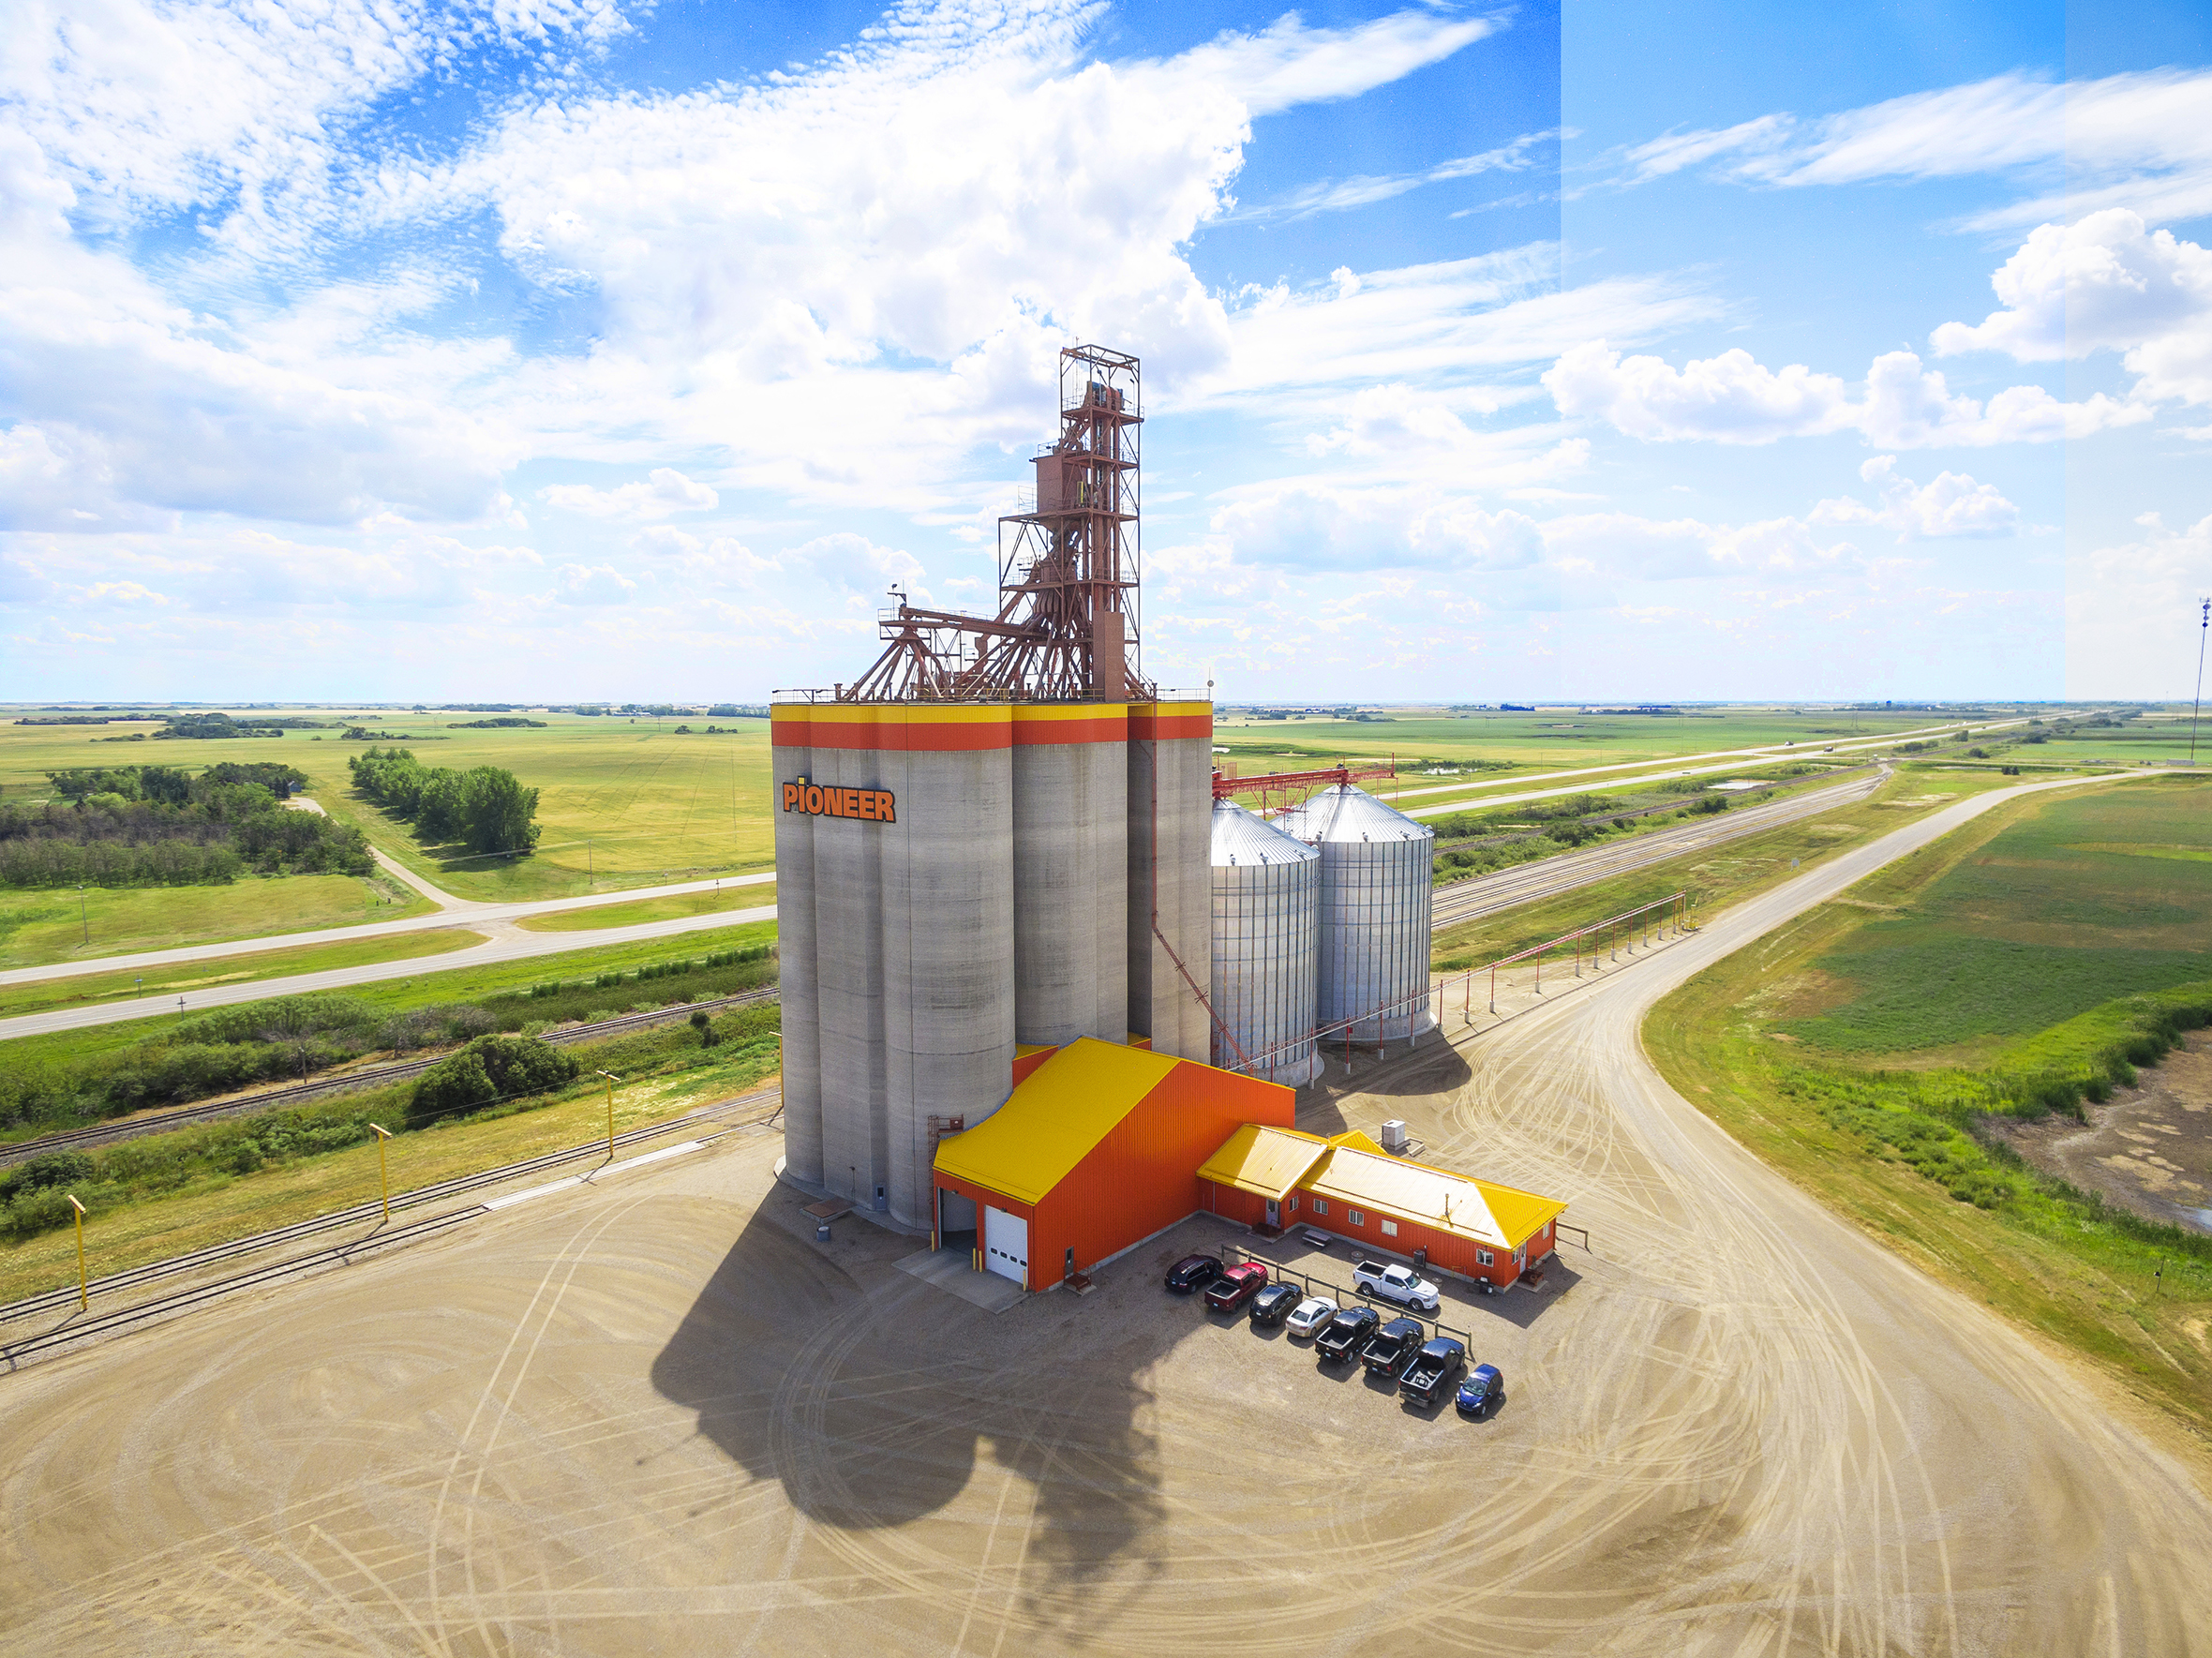 Featured image for “RICHARDSON PLANS NEW HIGH THROUGHPUT GRAIN ELEVATOR IN SWAN RIVER, MANITOBA”